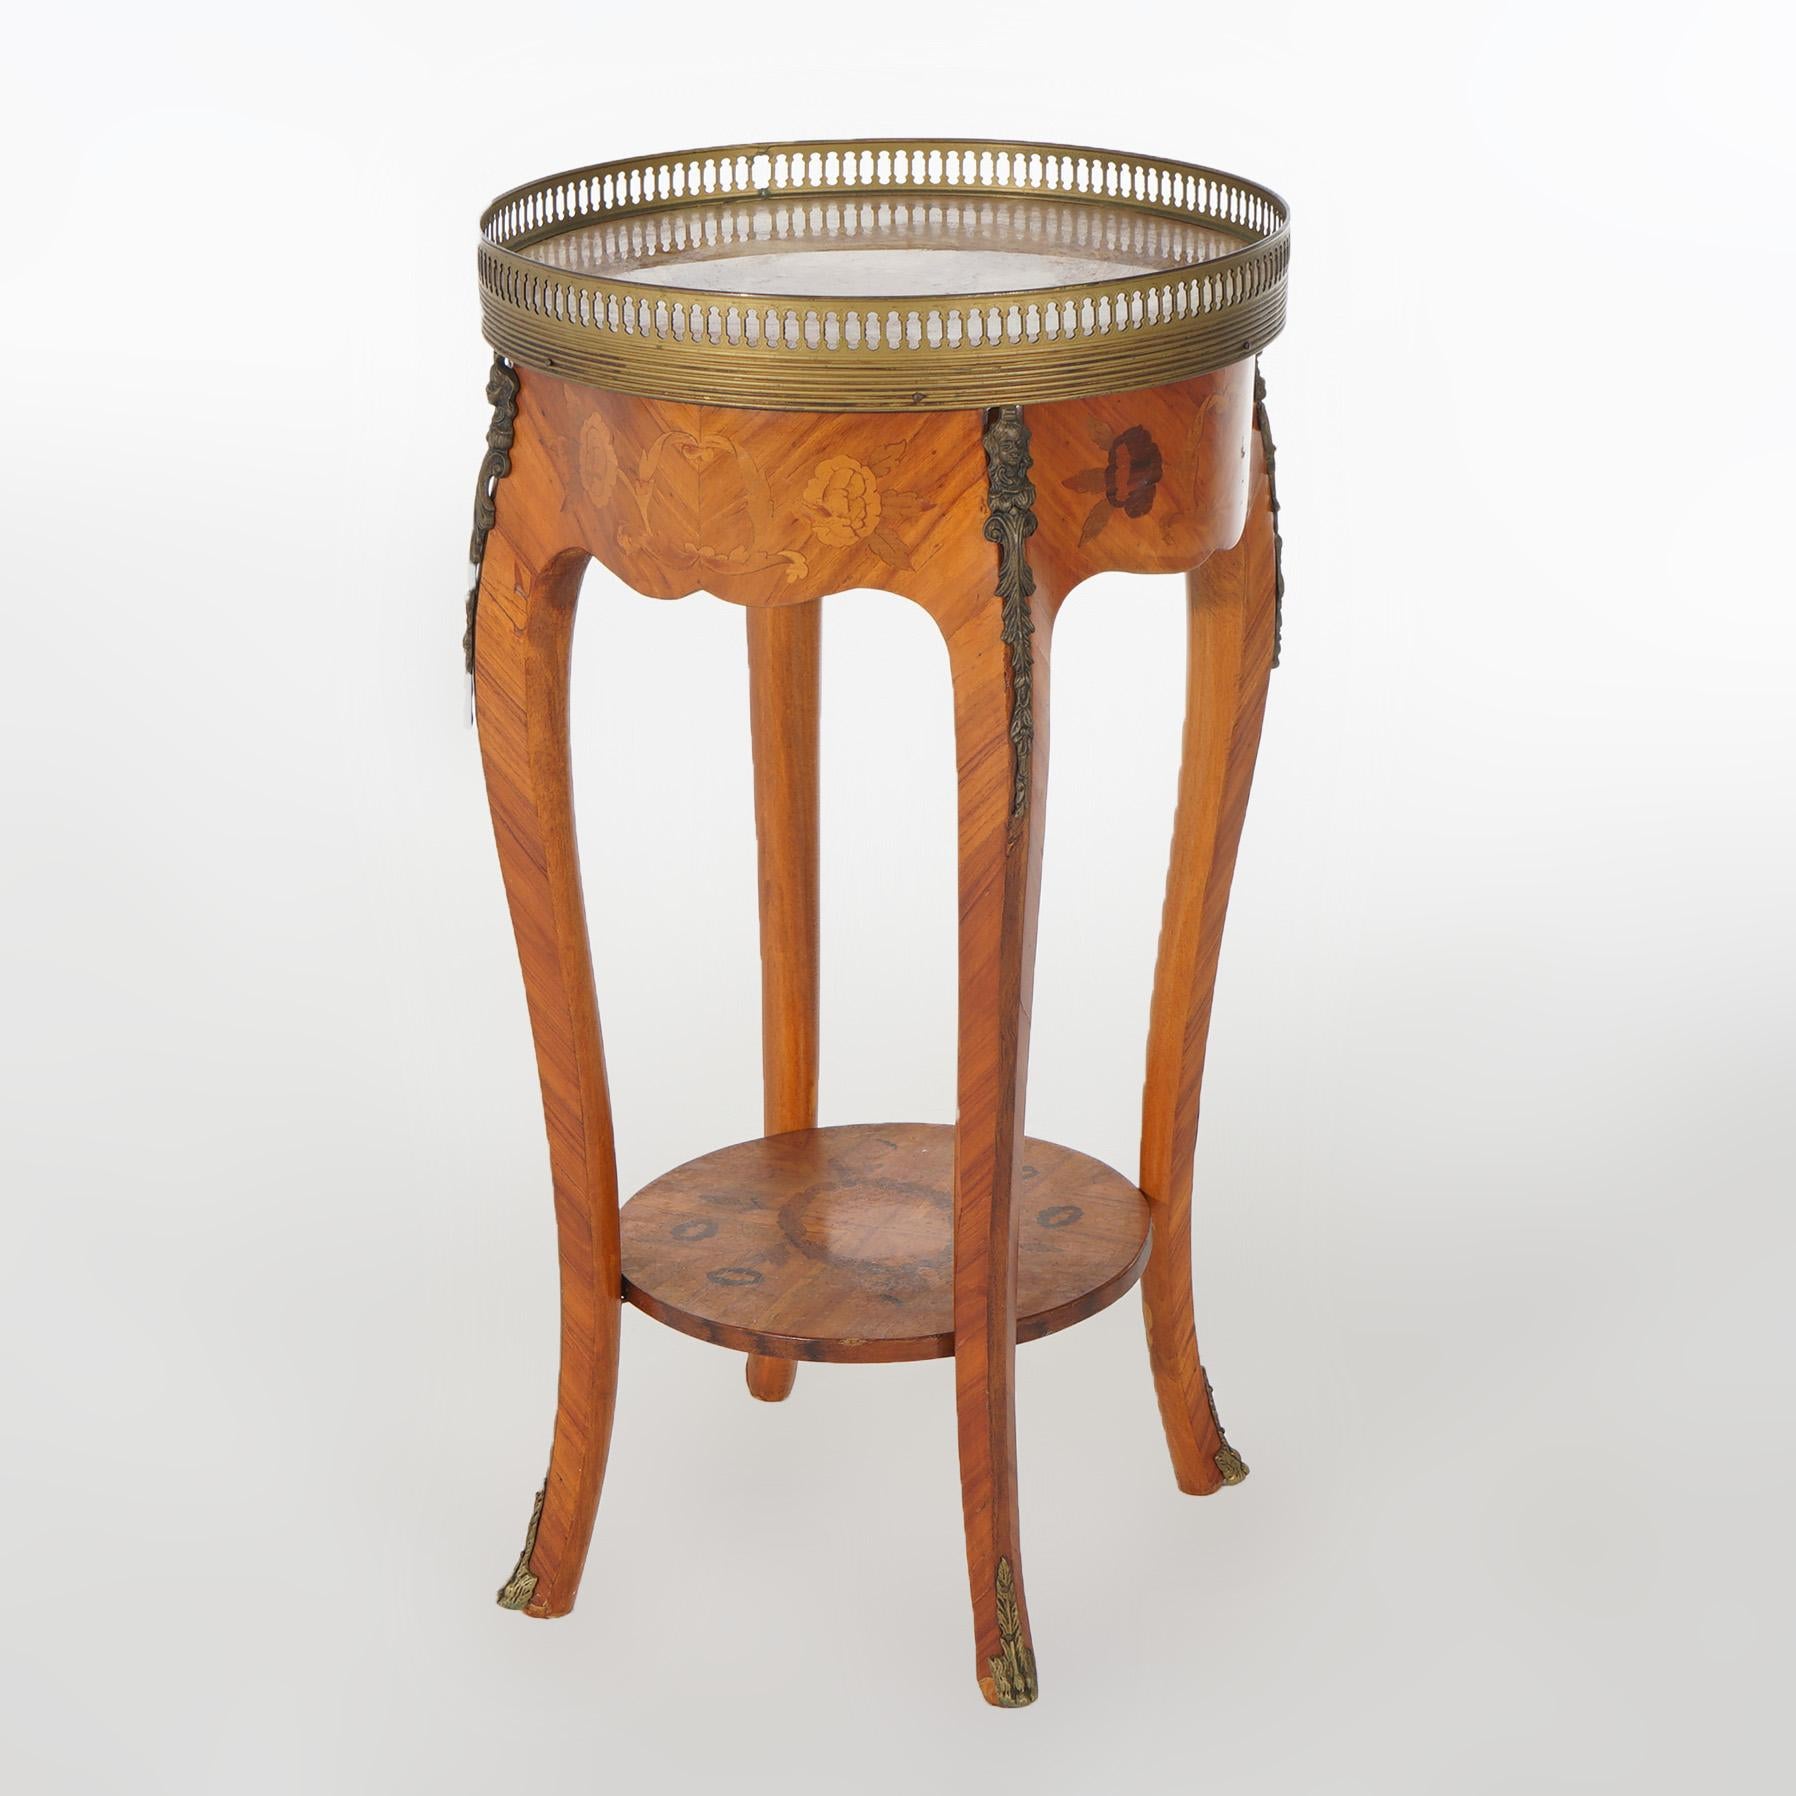 20th Century French Louis XVI Style Satinwood, Inlaid Marquetry & Rouge Marble Top Table For Sale